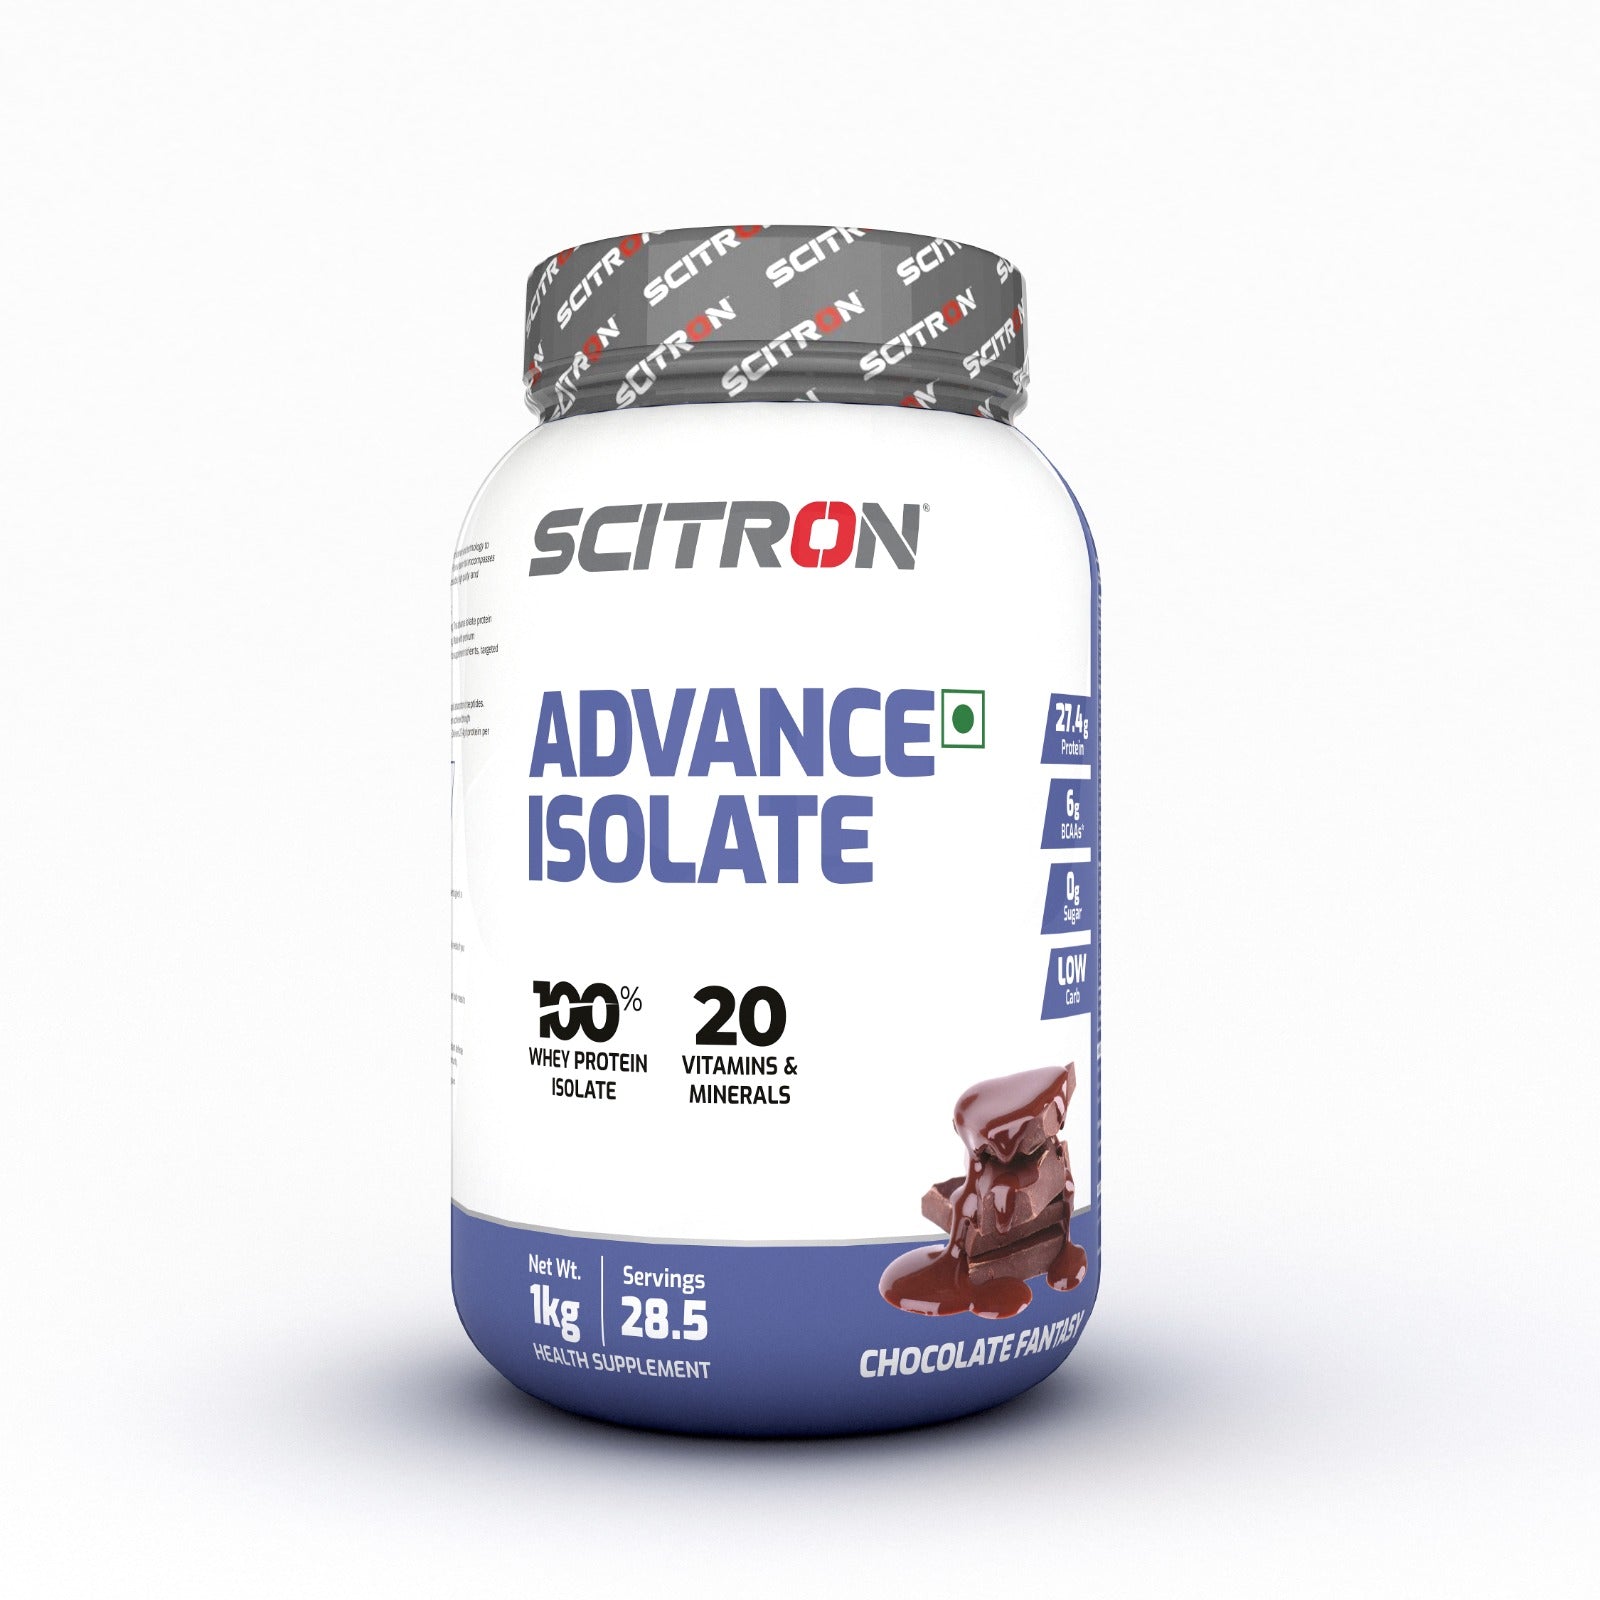 Whey Isolate in Chocolate flavour